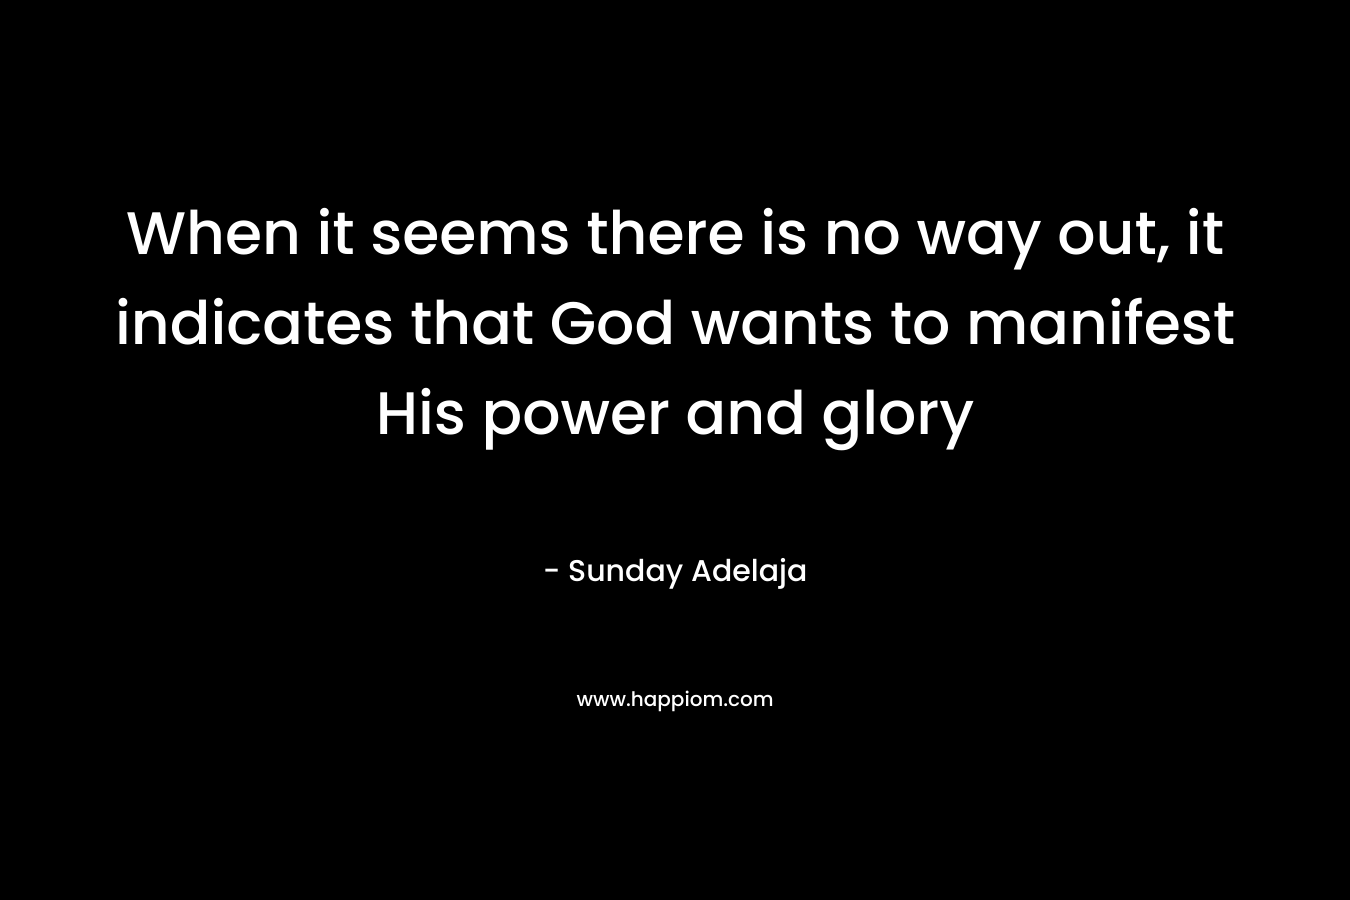 When it seems there is no way out, it indicates that God wants to manifest His power and glory